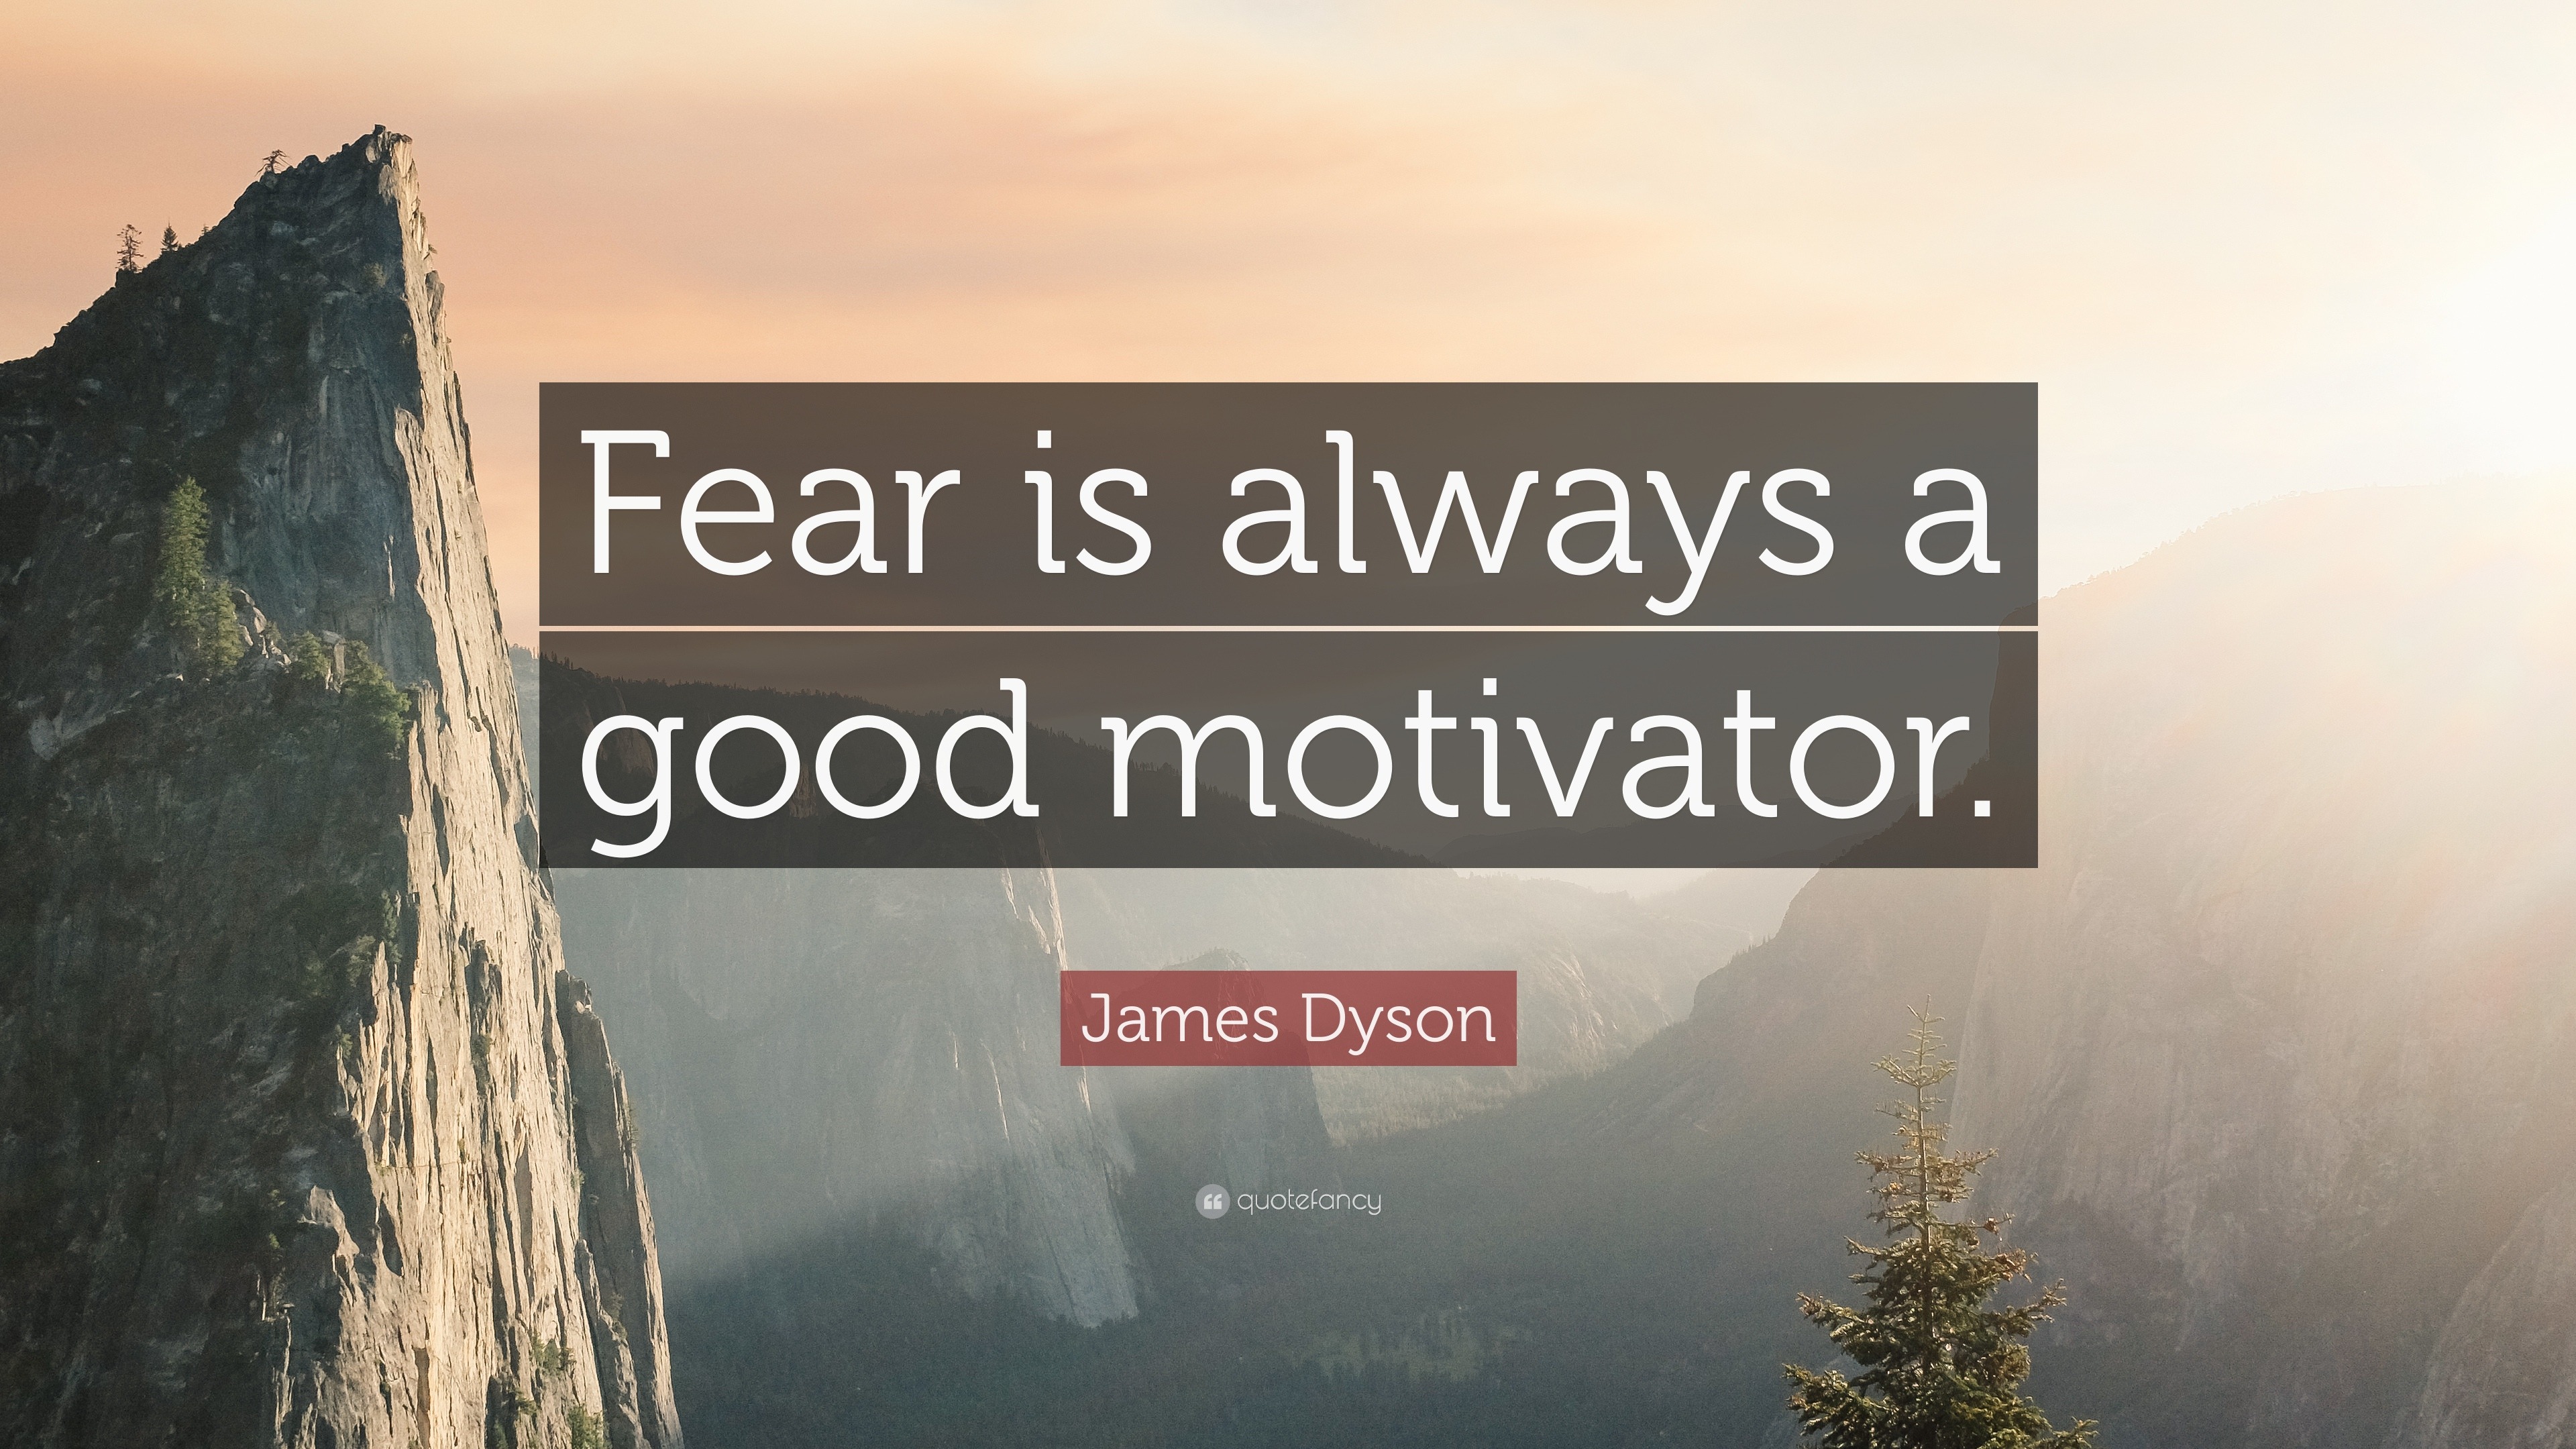 James Dyson Quote: “Fear is always a good motivator.”